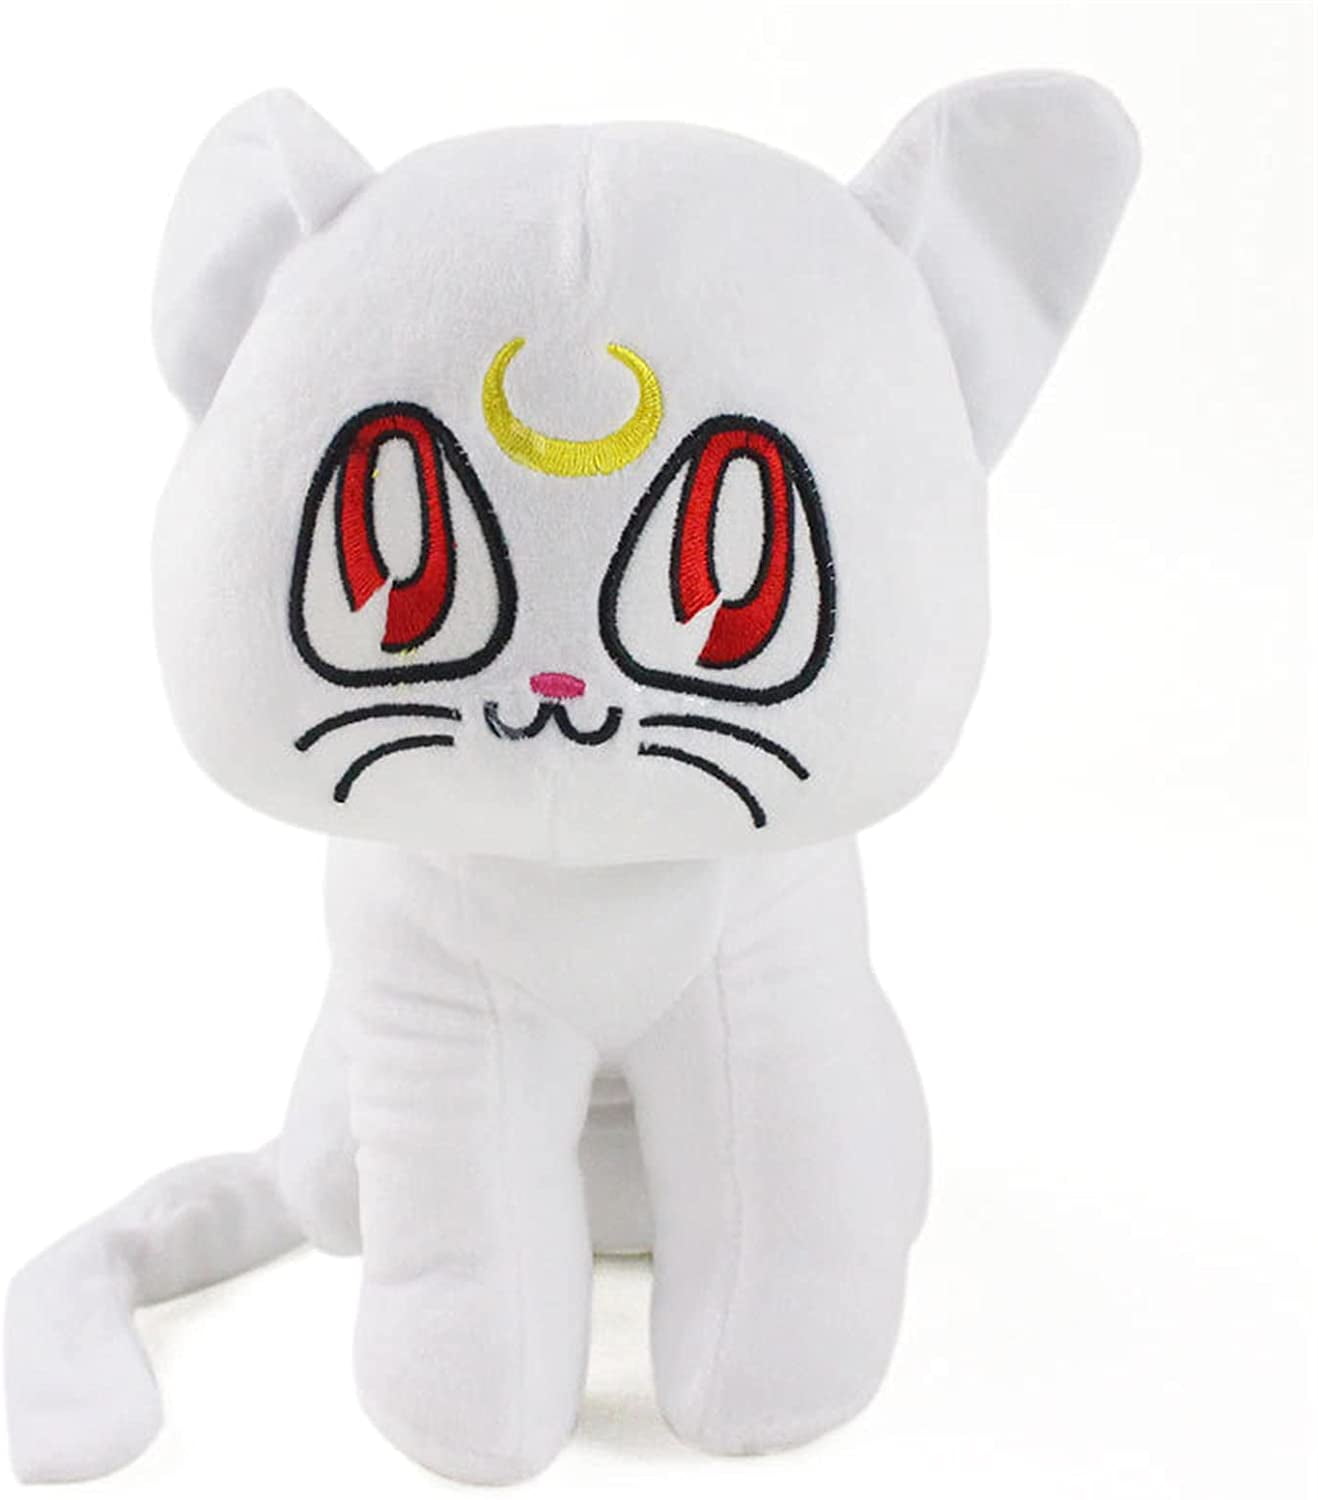 New Anime Sailor Moon Plush Toy Soft Stuffed Doll Figure 30cm 12' Great Gift 